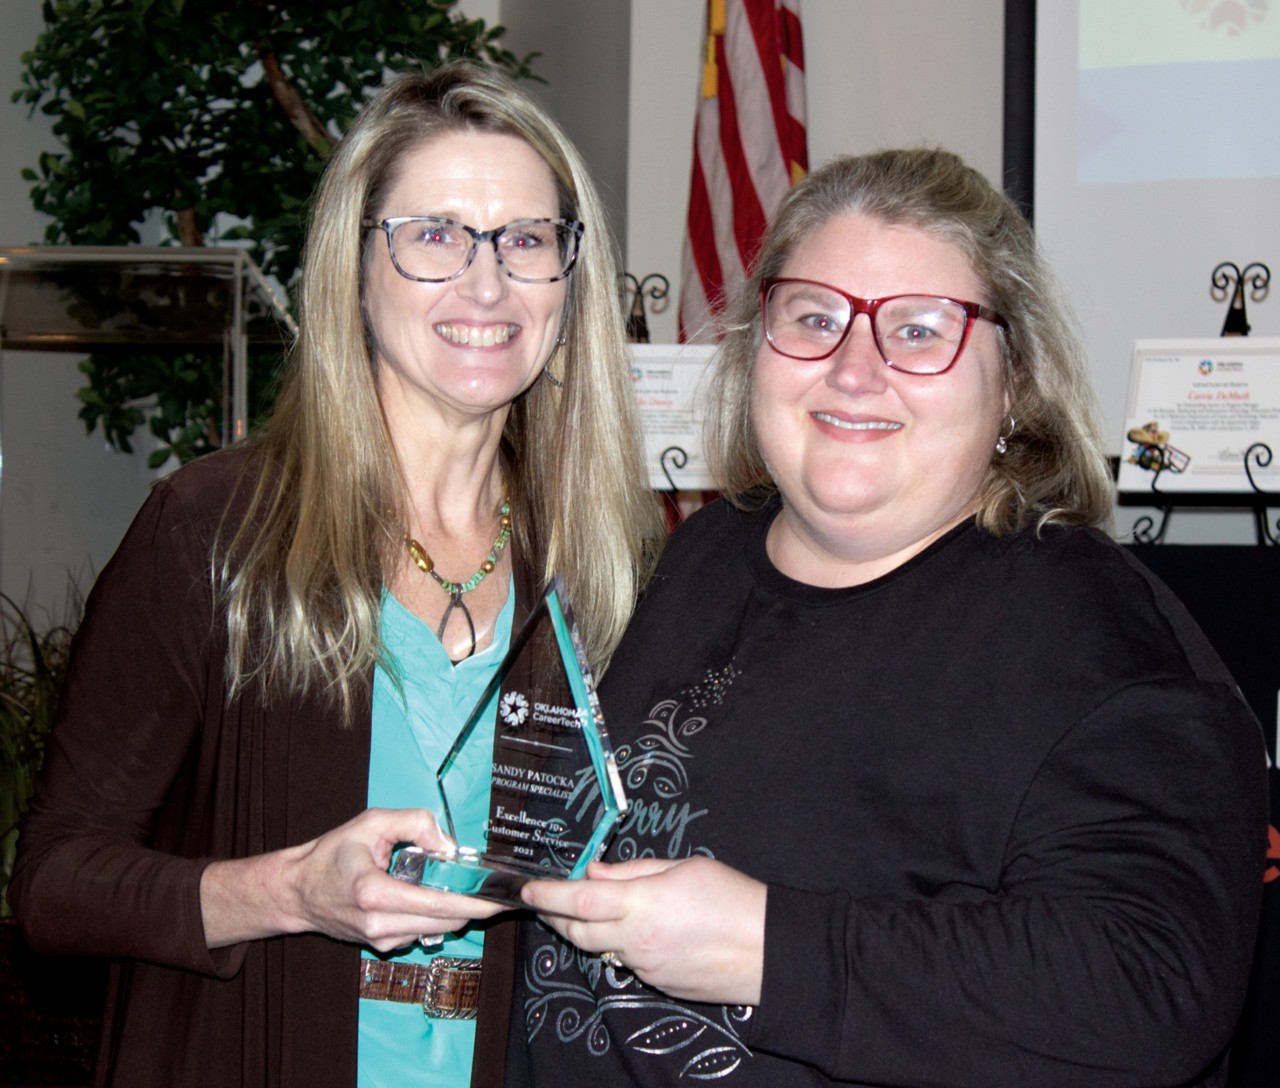 Sandy Patocka, right, received an Excellence in Customer Service Pinnacle Award. With her is Oklahoma CareerTech State Director Marcie Mack.